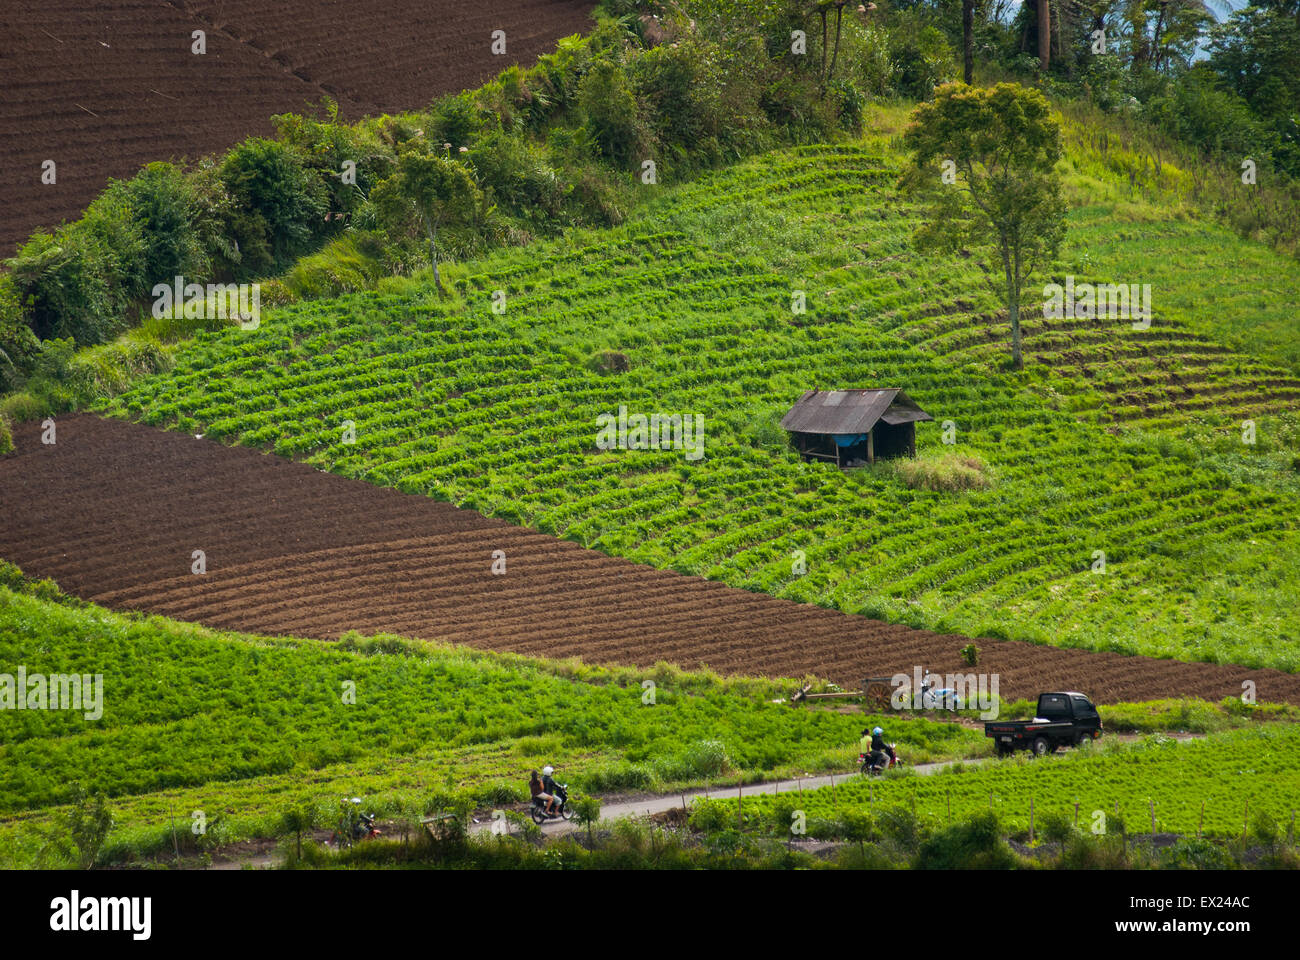 Vegetable fields on the slope of Mount Mahawu volcano in Tomohon, North Sulawesi, Indonesia. Stock Photo